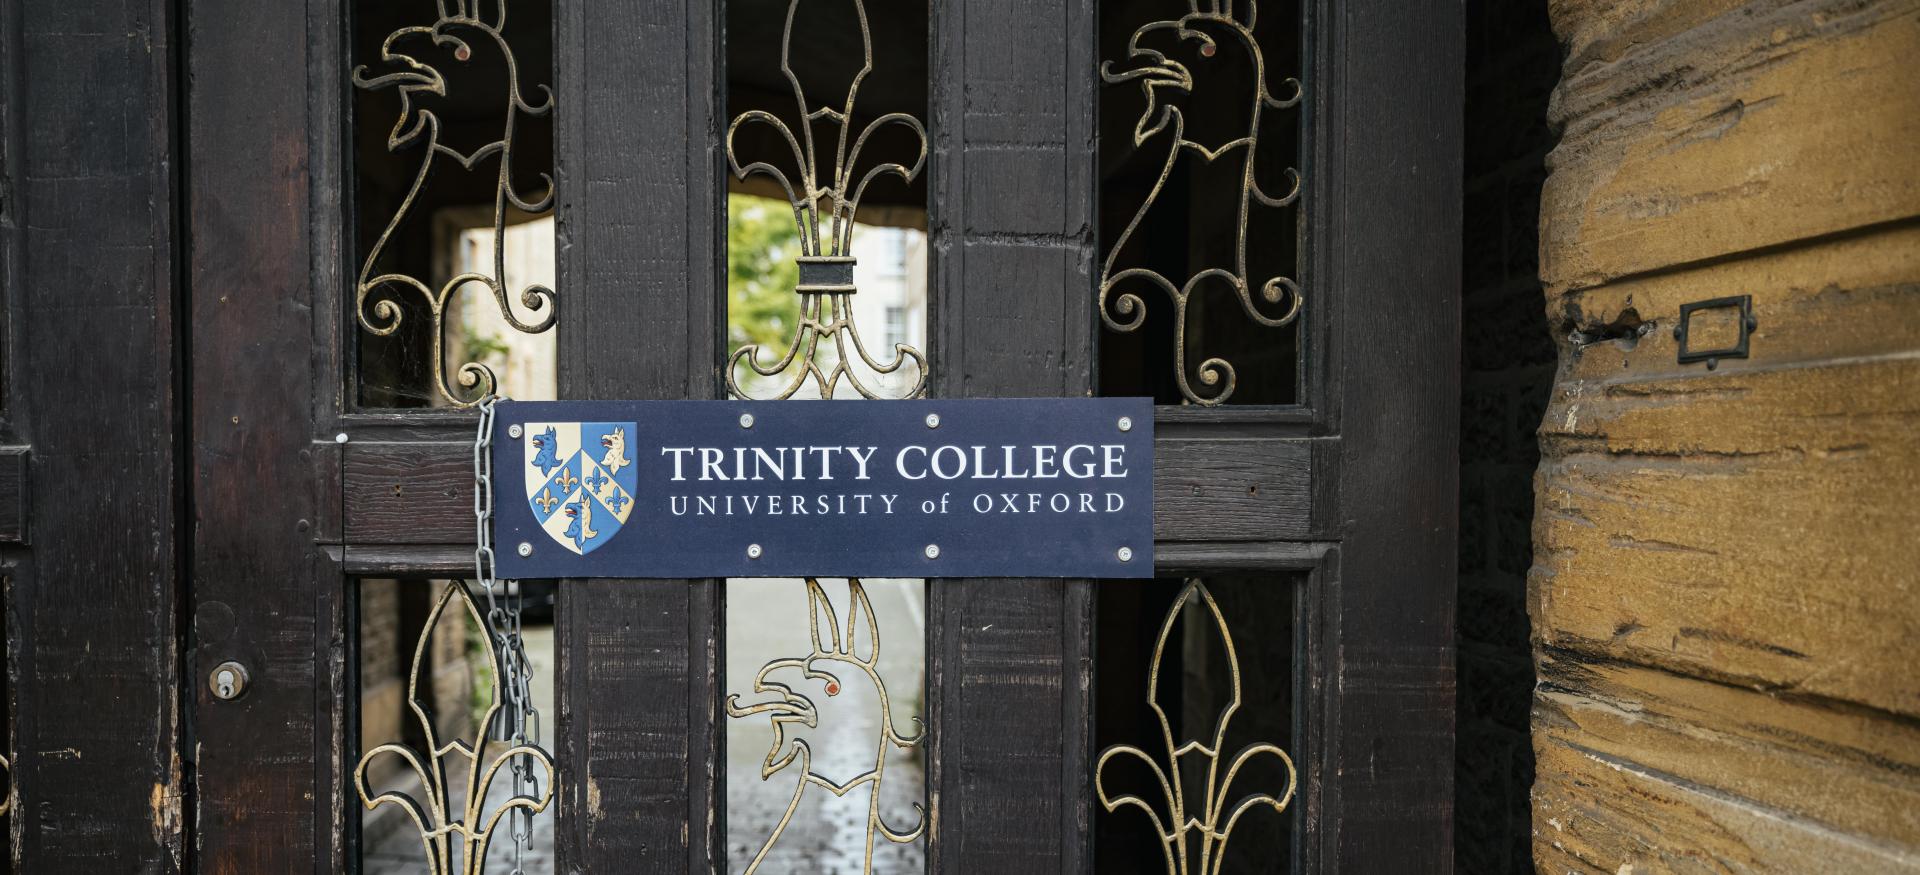 The side entrance to trinity College with ironwork in the shape of gryphons and a sign reading 'Trinity College Oxford'